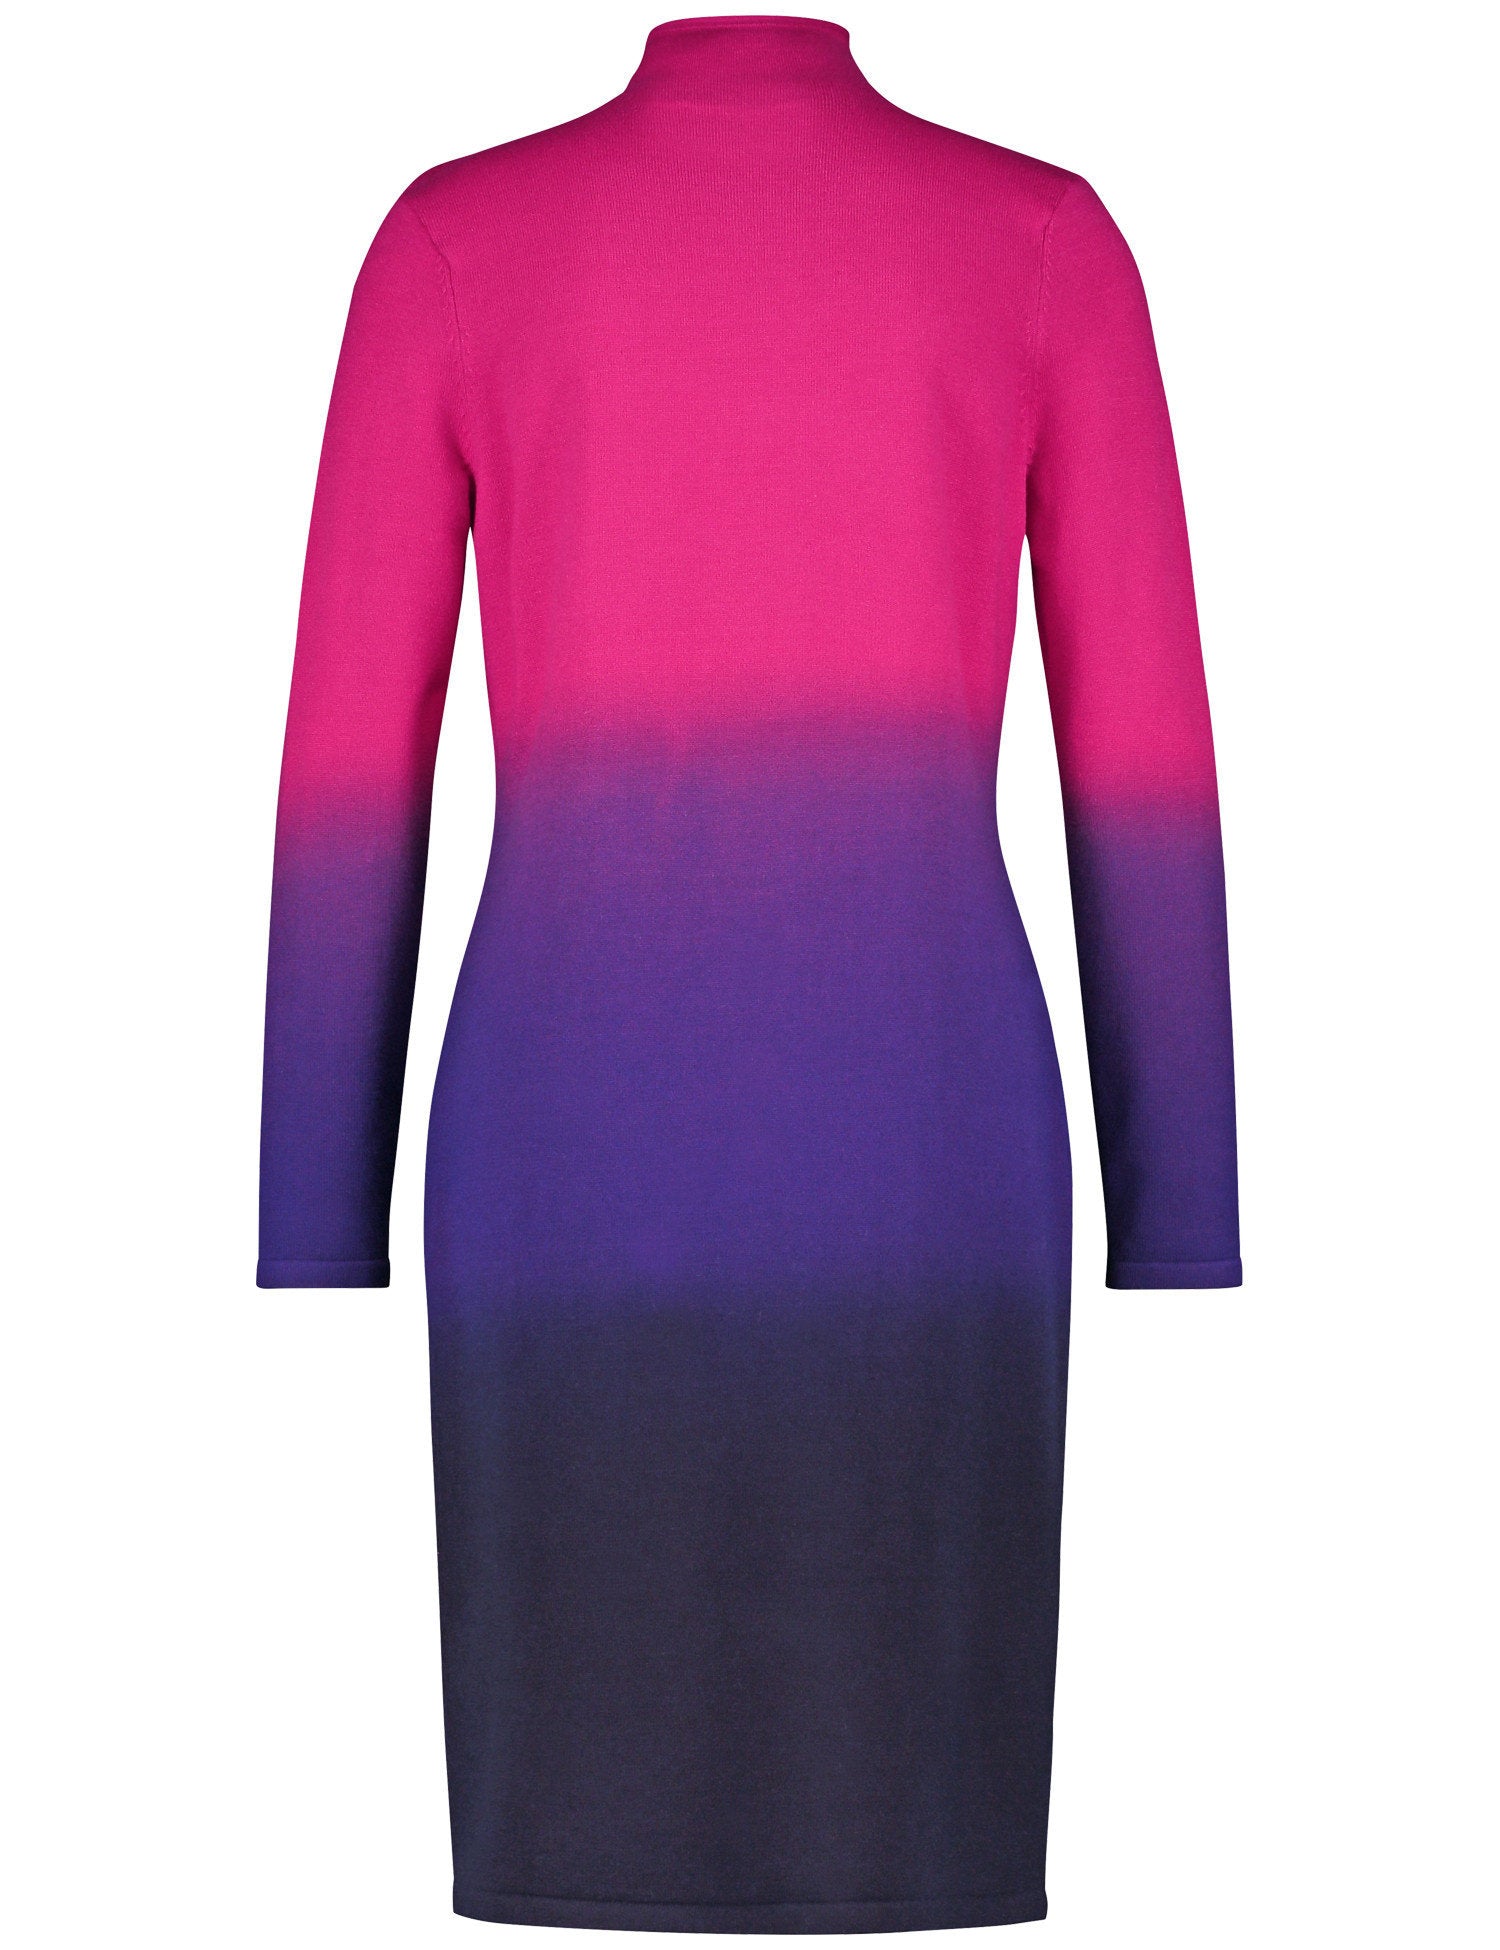 Knitted Dress With A Stand-Up Collar And Colour Graduation_280053-35708_3038_03